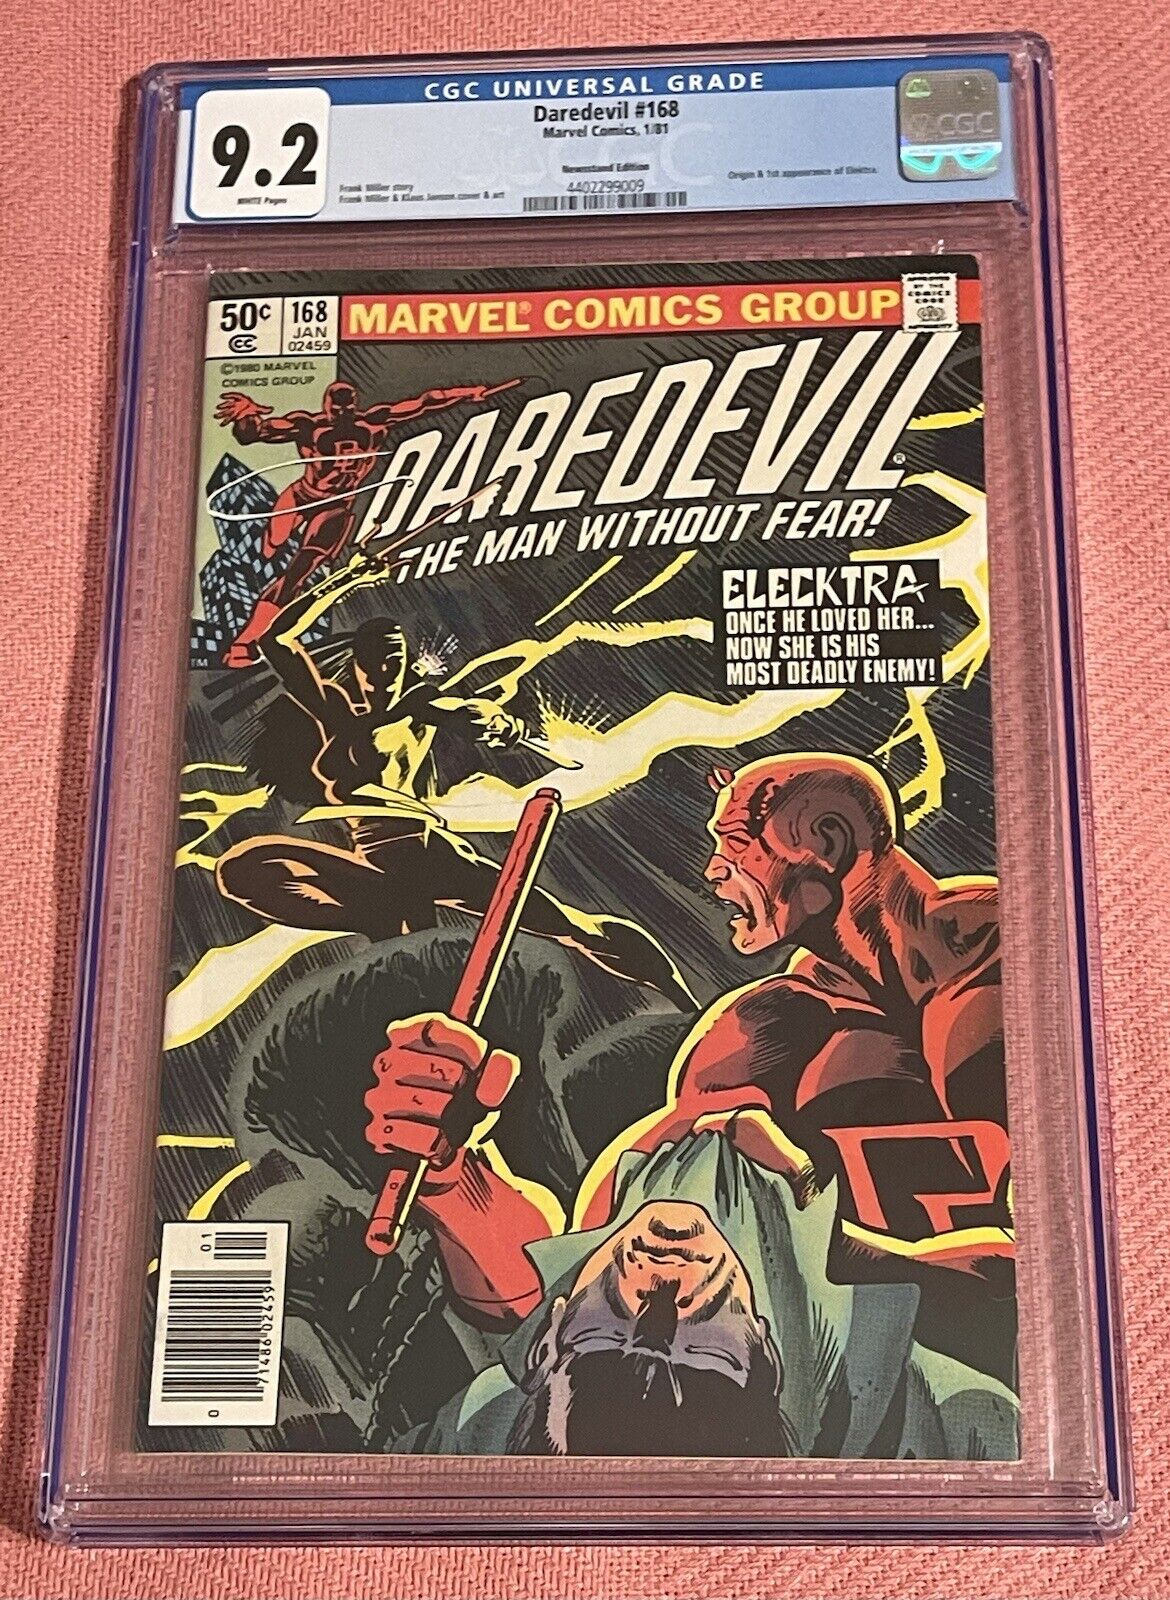 Daredevil #168 CGC 9.2 White Pages, Newsstand, 1st appearance of Elektra, Marvel